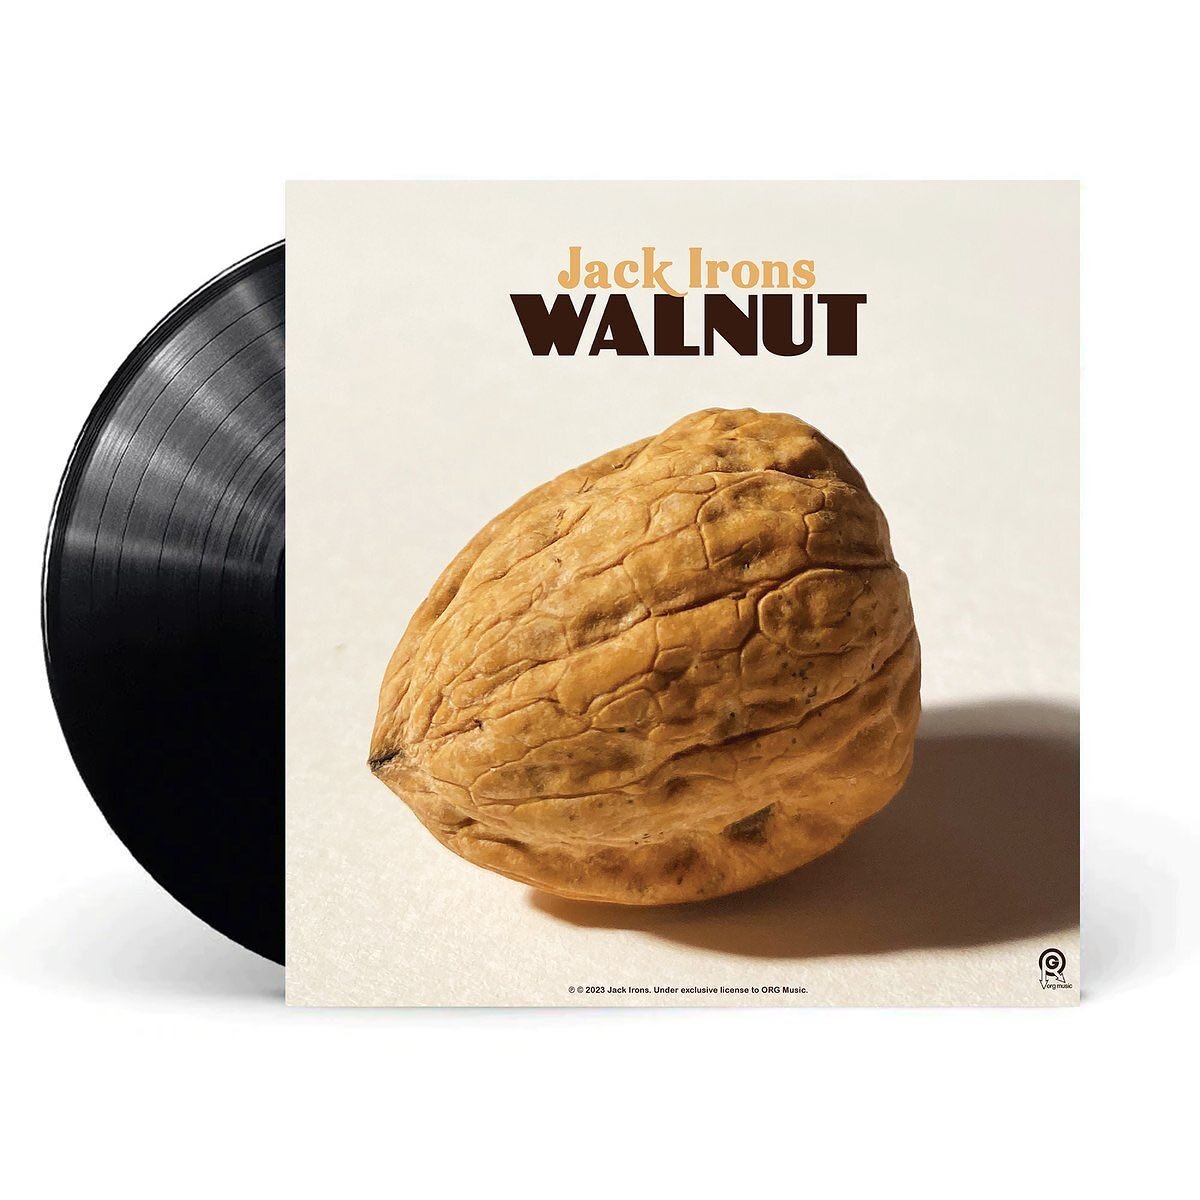 New music from @jackironsdrummer Available July 28, 2023.

Walnut is the latest EP from Jack Irons. This release features six new tracks showcasing his virtuosic drumming, accented with synths to create a unique sonic world.
#drums #drummer #jackiron